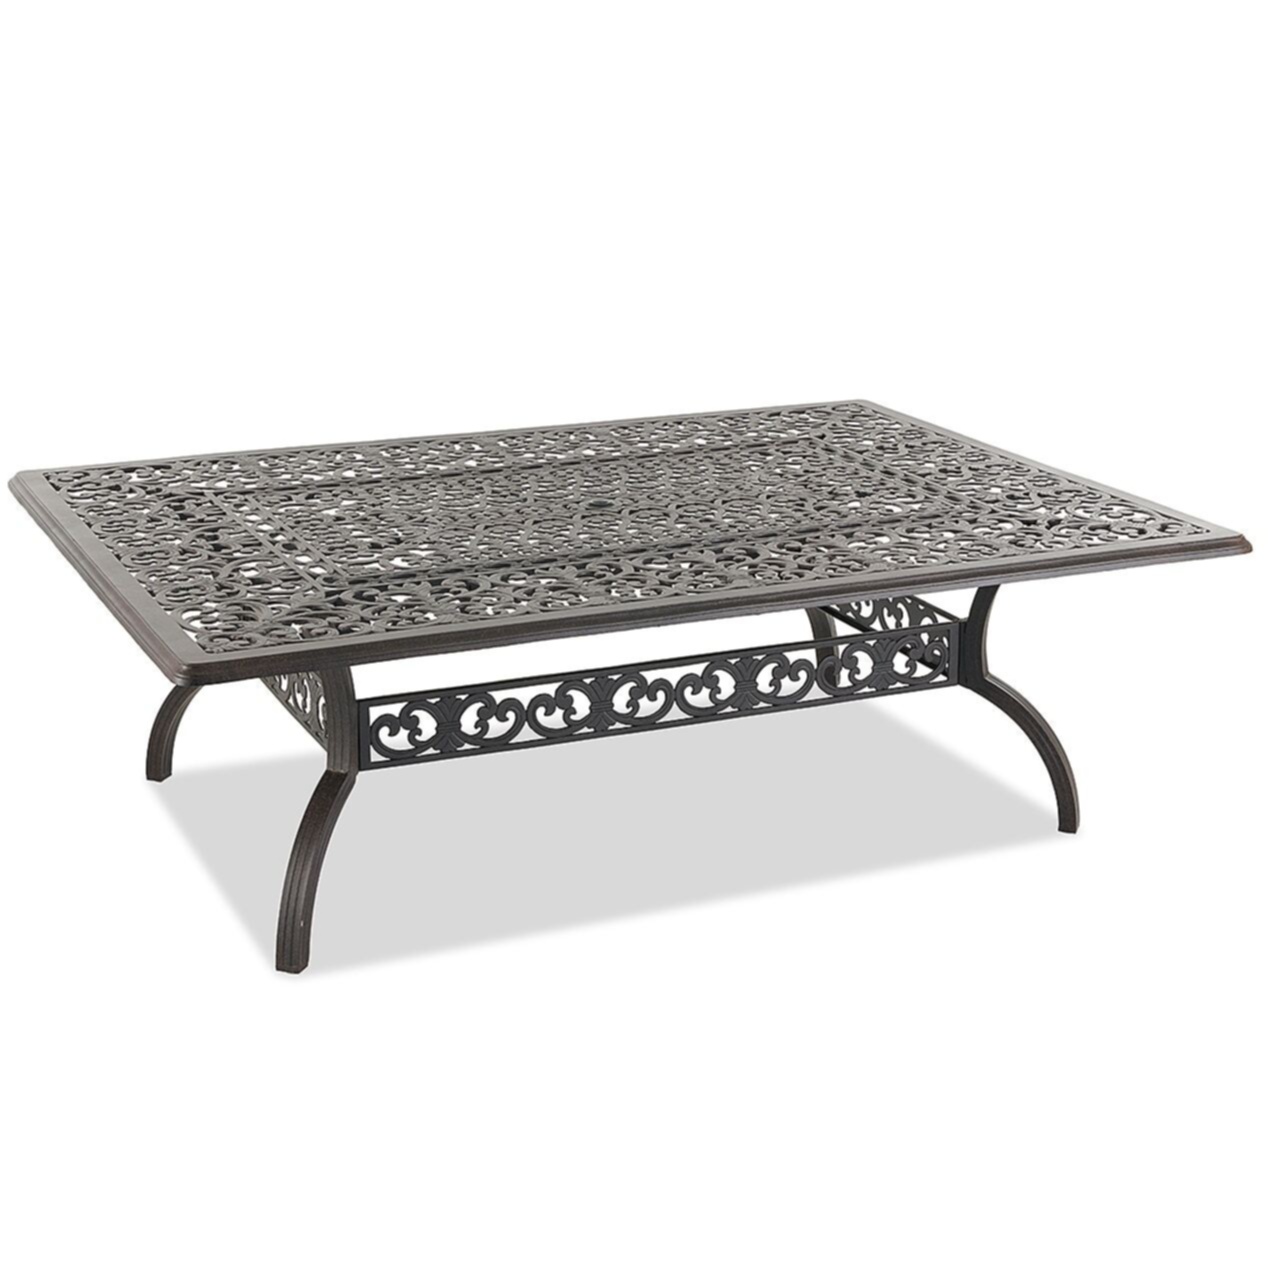 Home Cast Aluminum Coffee Table Modern Contemporary Traditional Rectangle Water Resistant